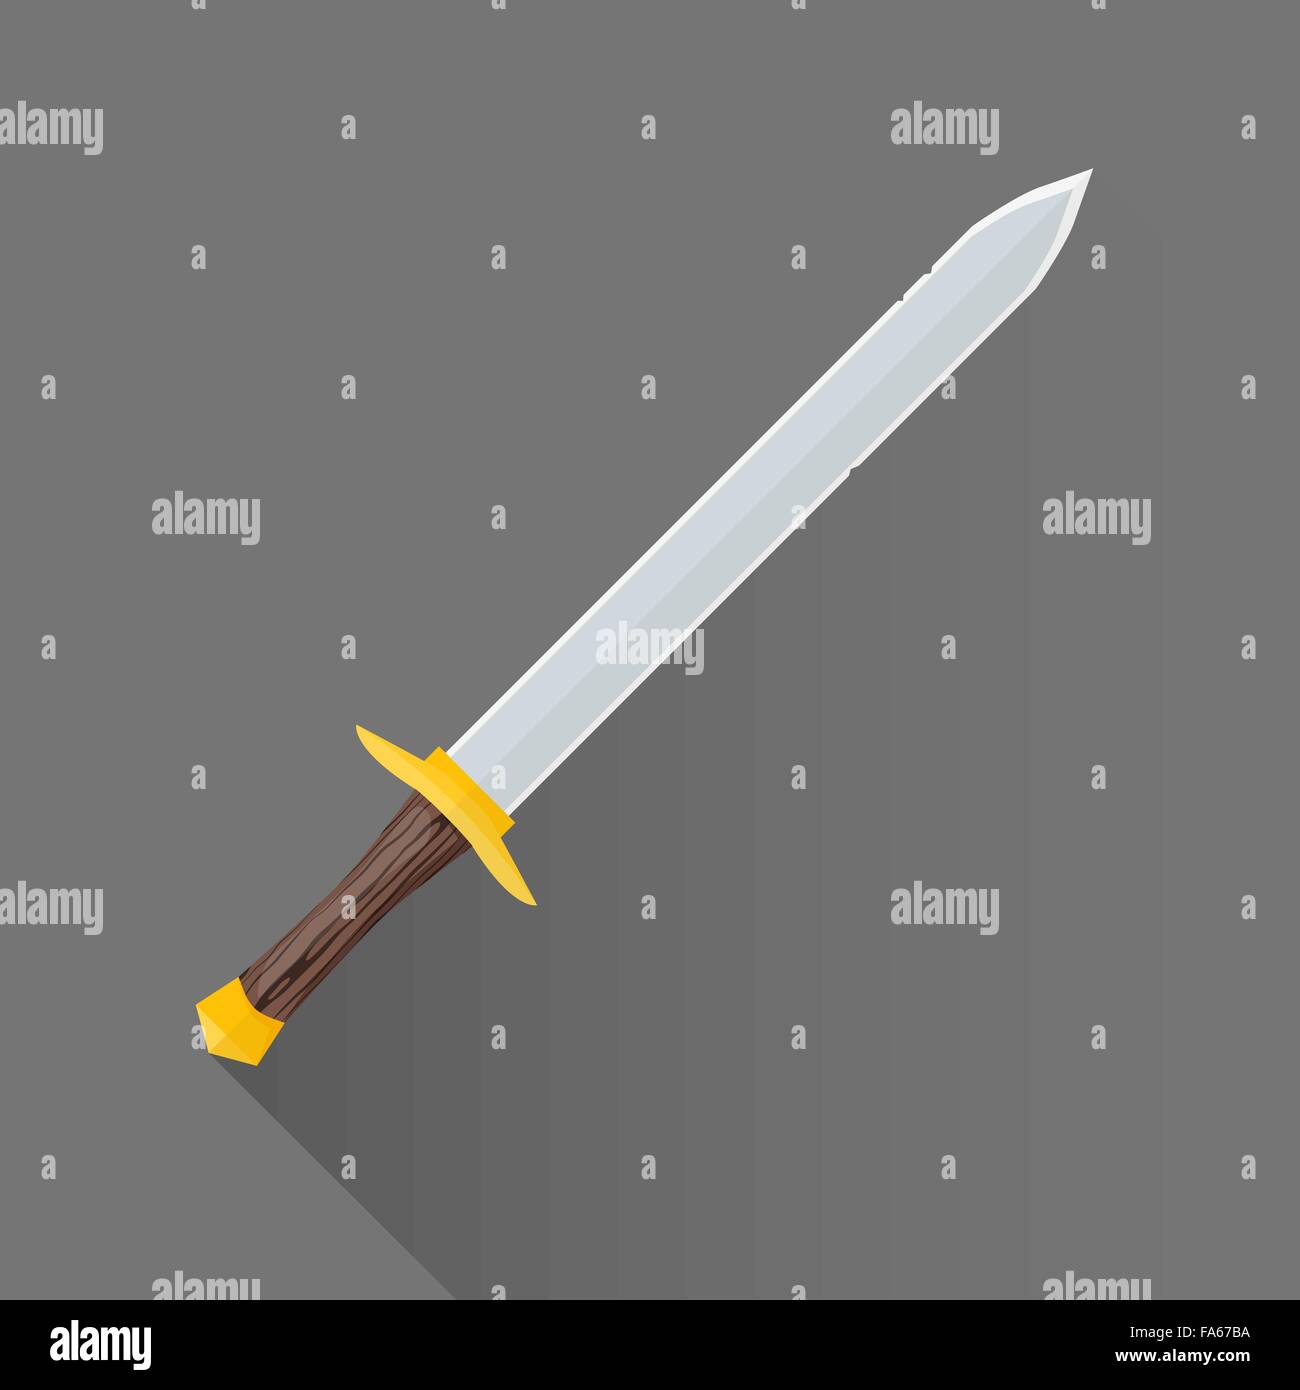 vector colored flat design metal sharp blade battle sword wood handle isolated illustration gray background long shadow Stock Vector